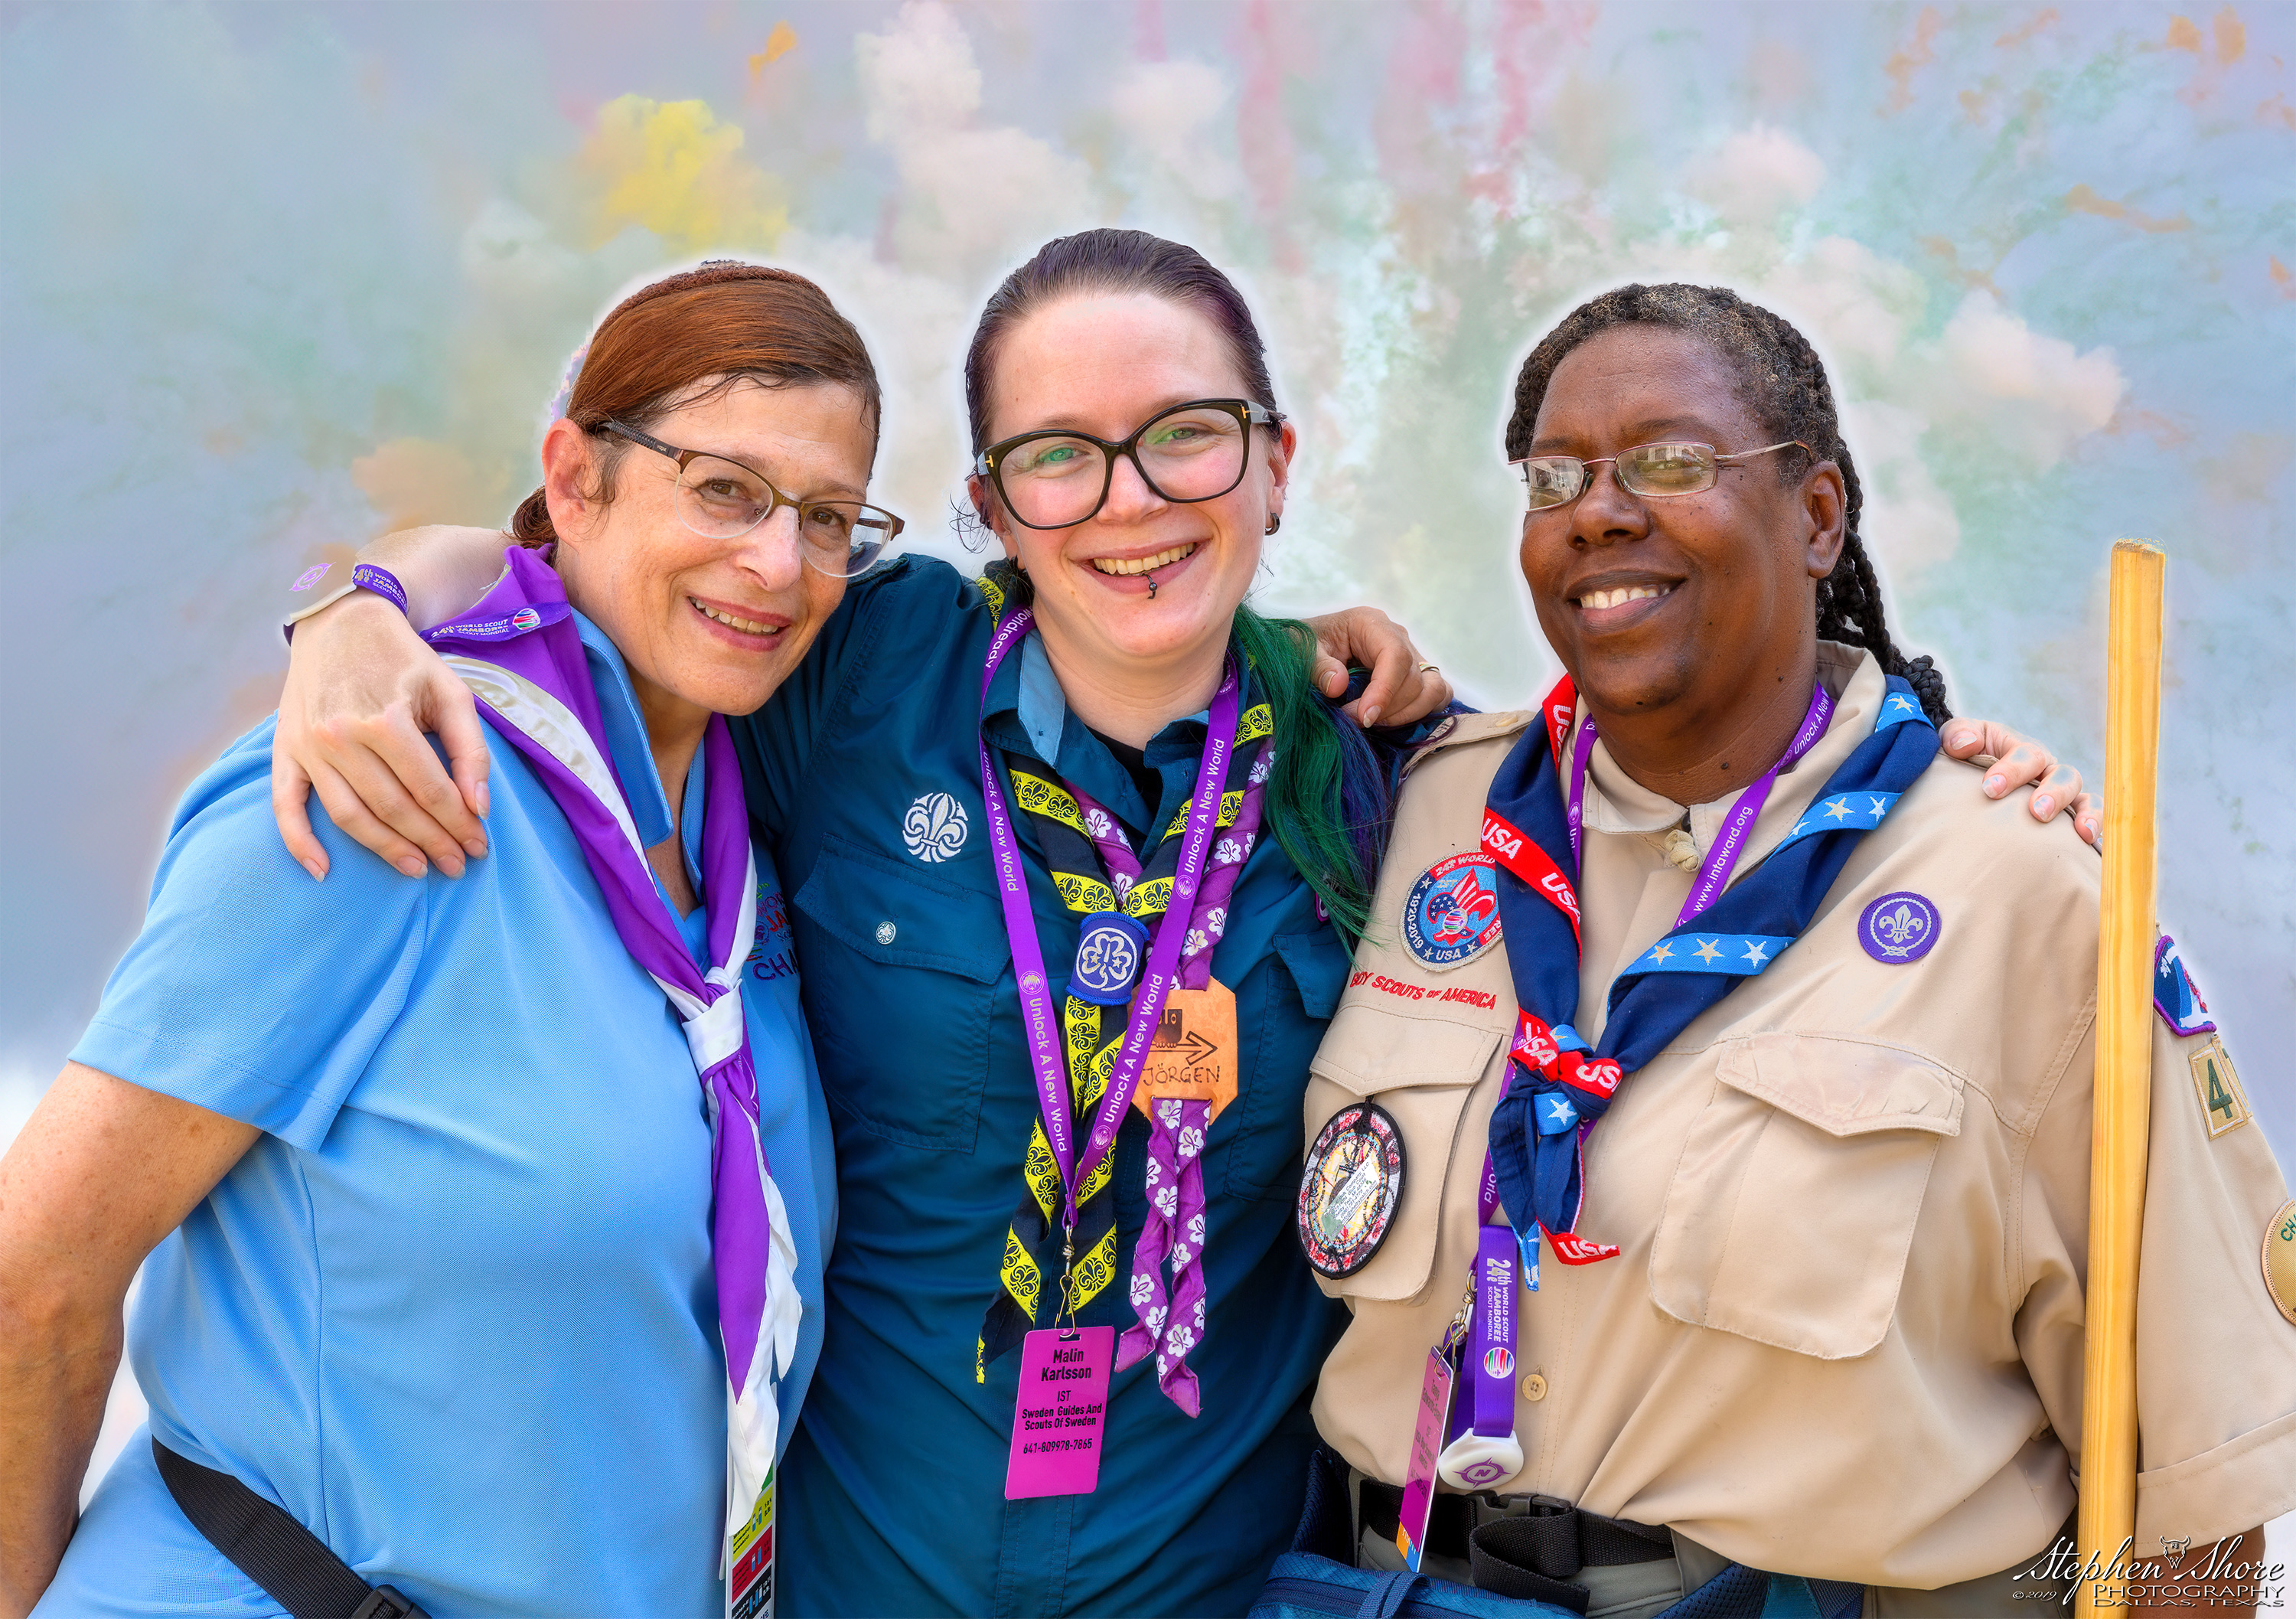 Lady Chaplains Making Their Presence Known at 24th World Scout Jamboree